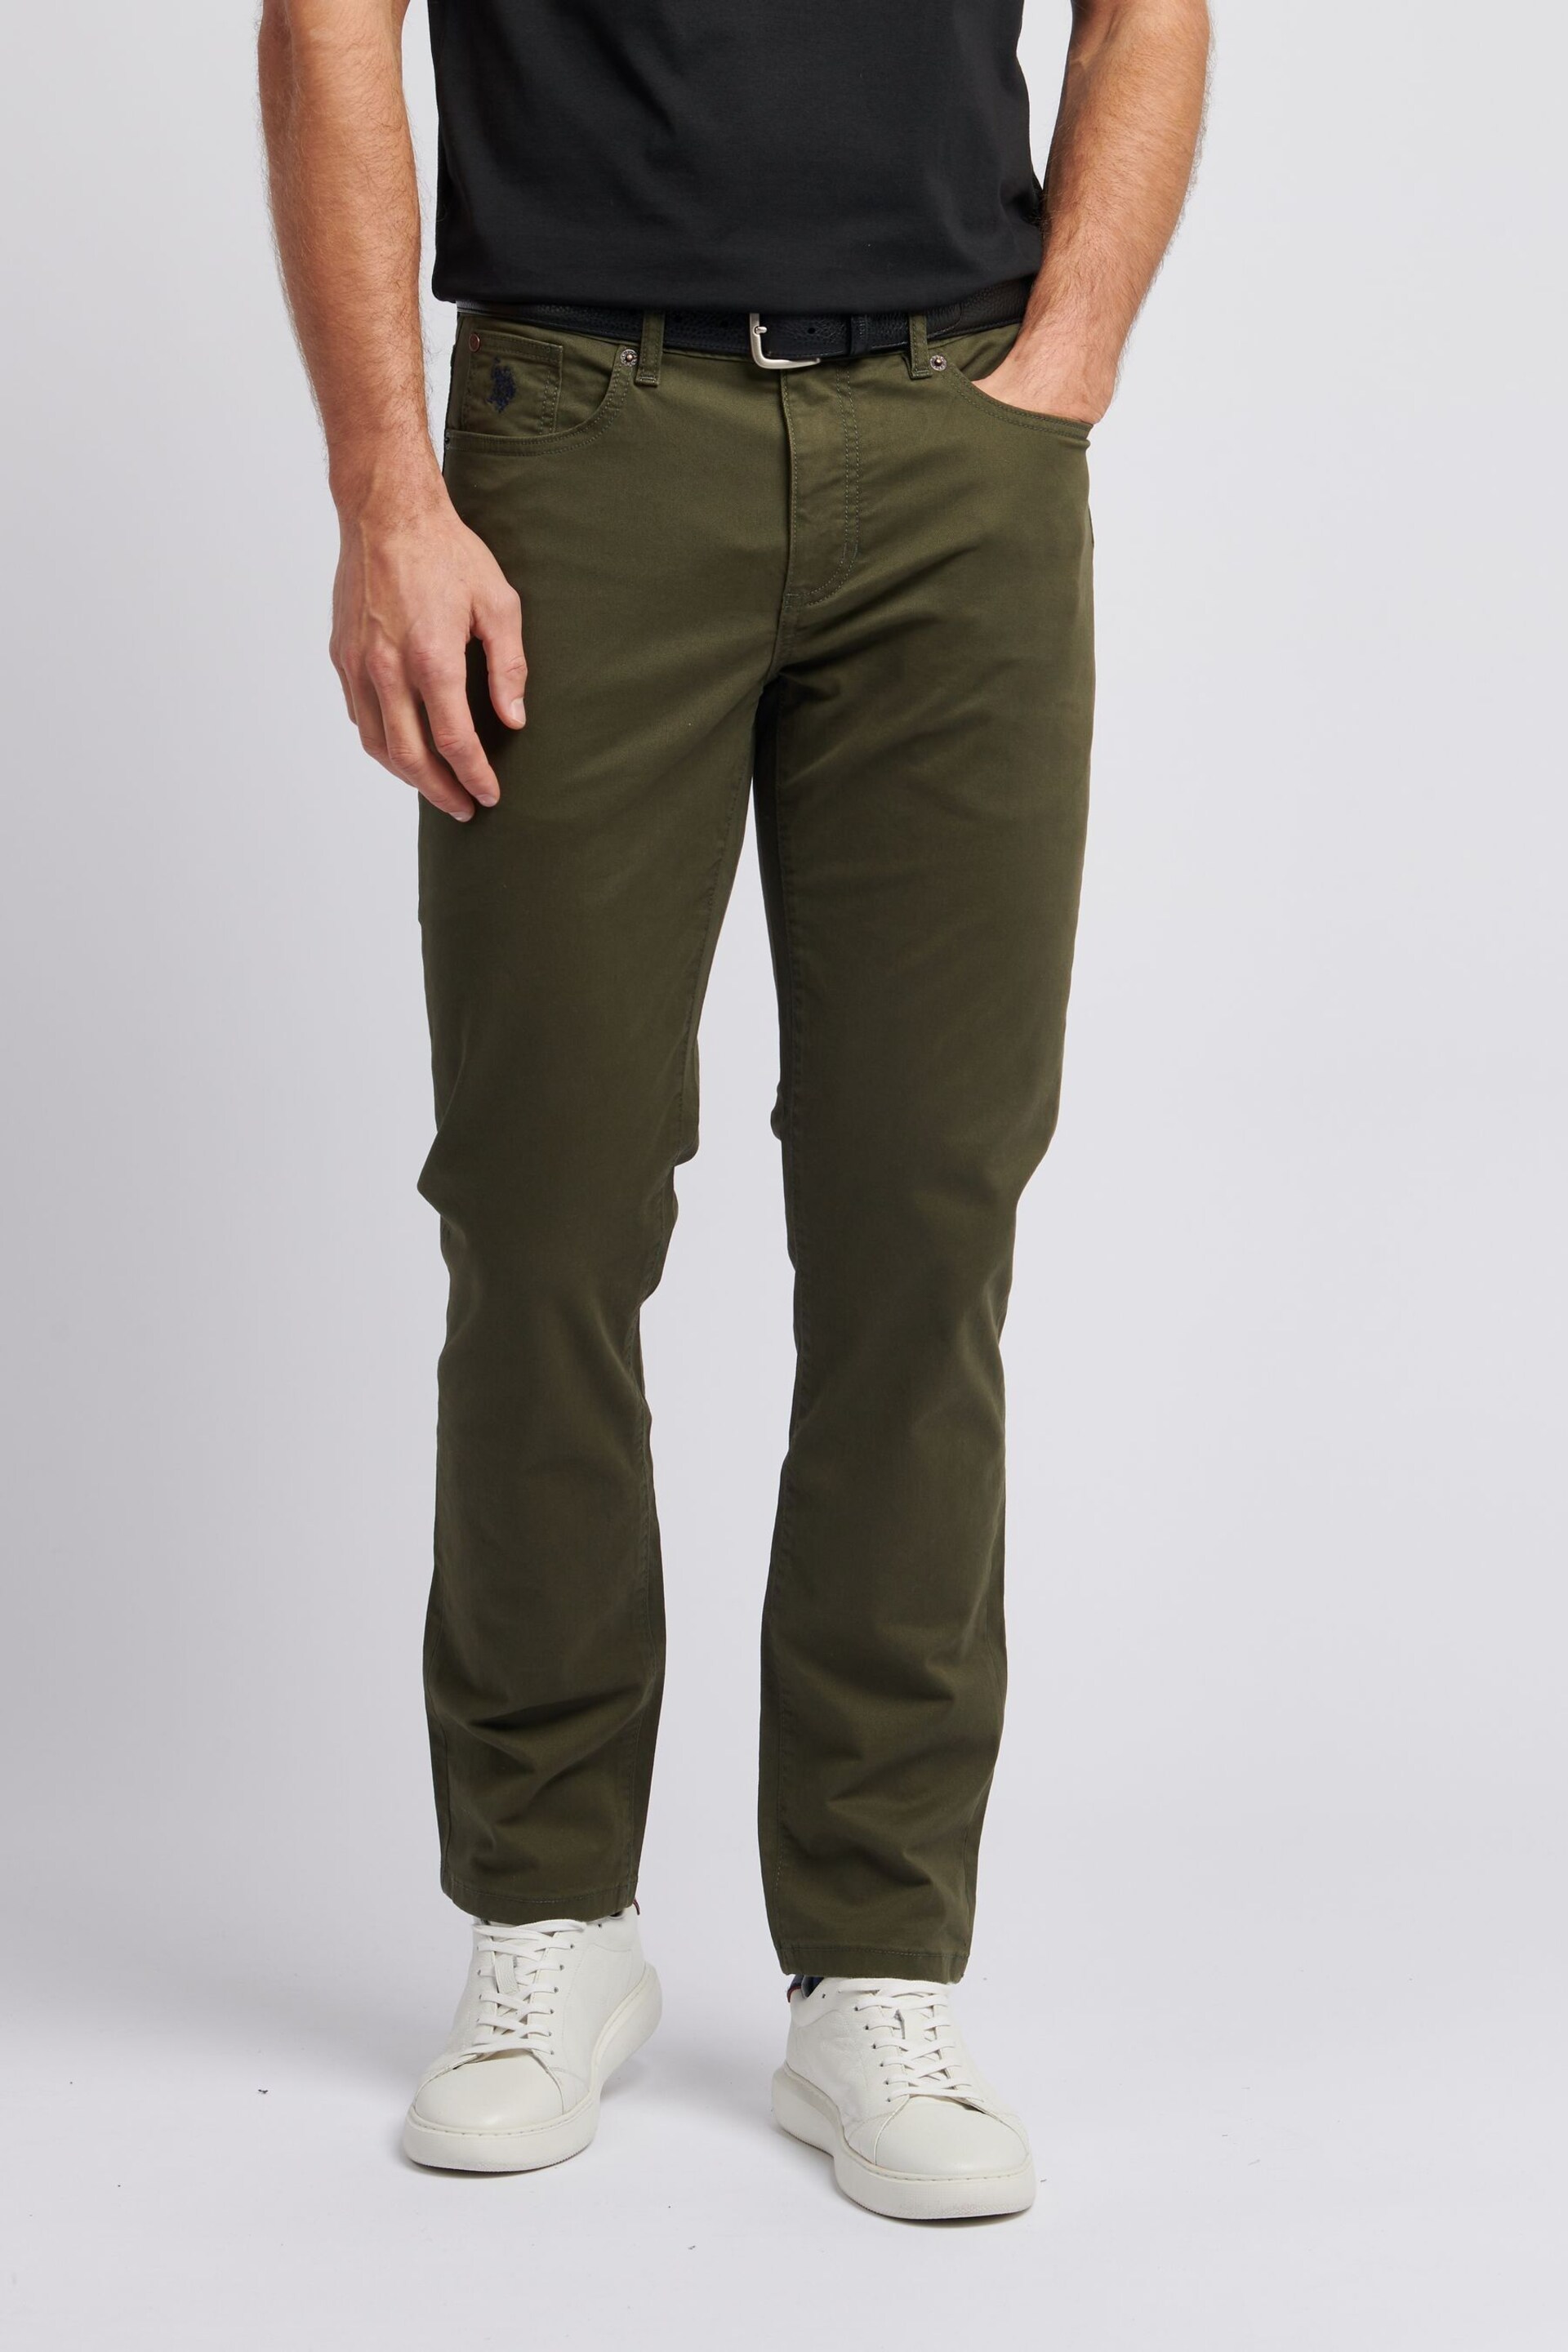 U.S. Polo Assn. Mens Core 5 Pocket Trousers - Image 1 of 9